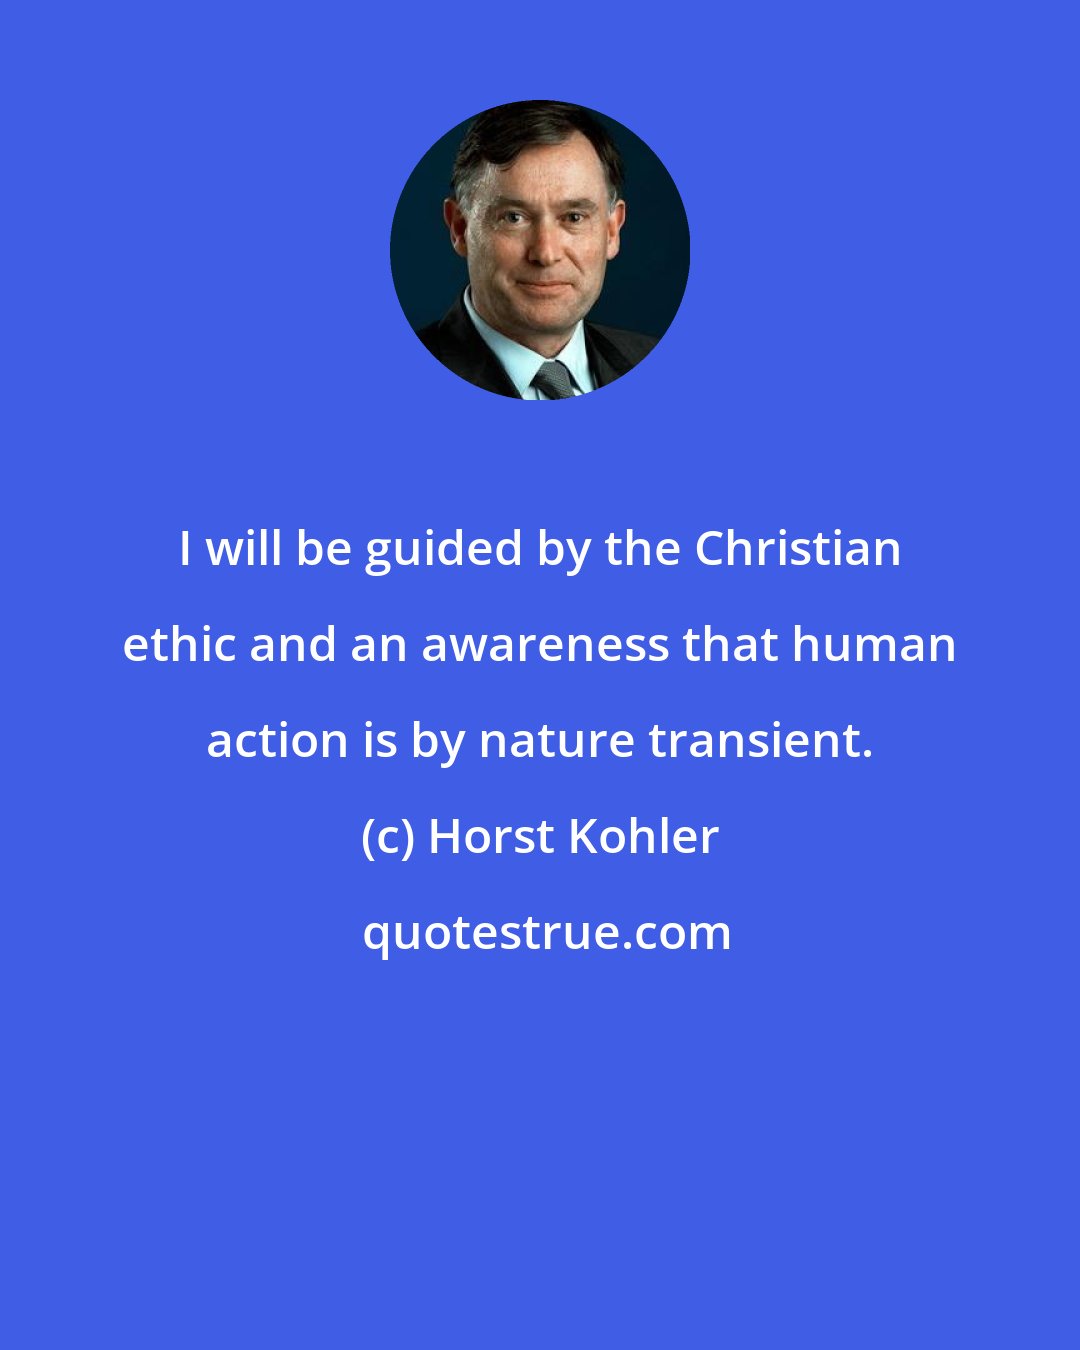 Horst Kohler: I will be guided by the Christian ethic and an awareness that human action is by nature transient.